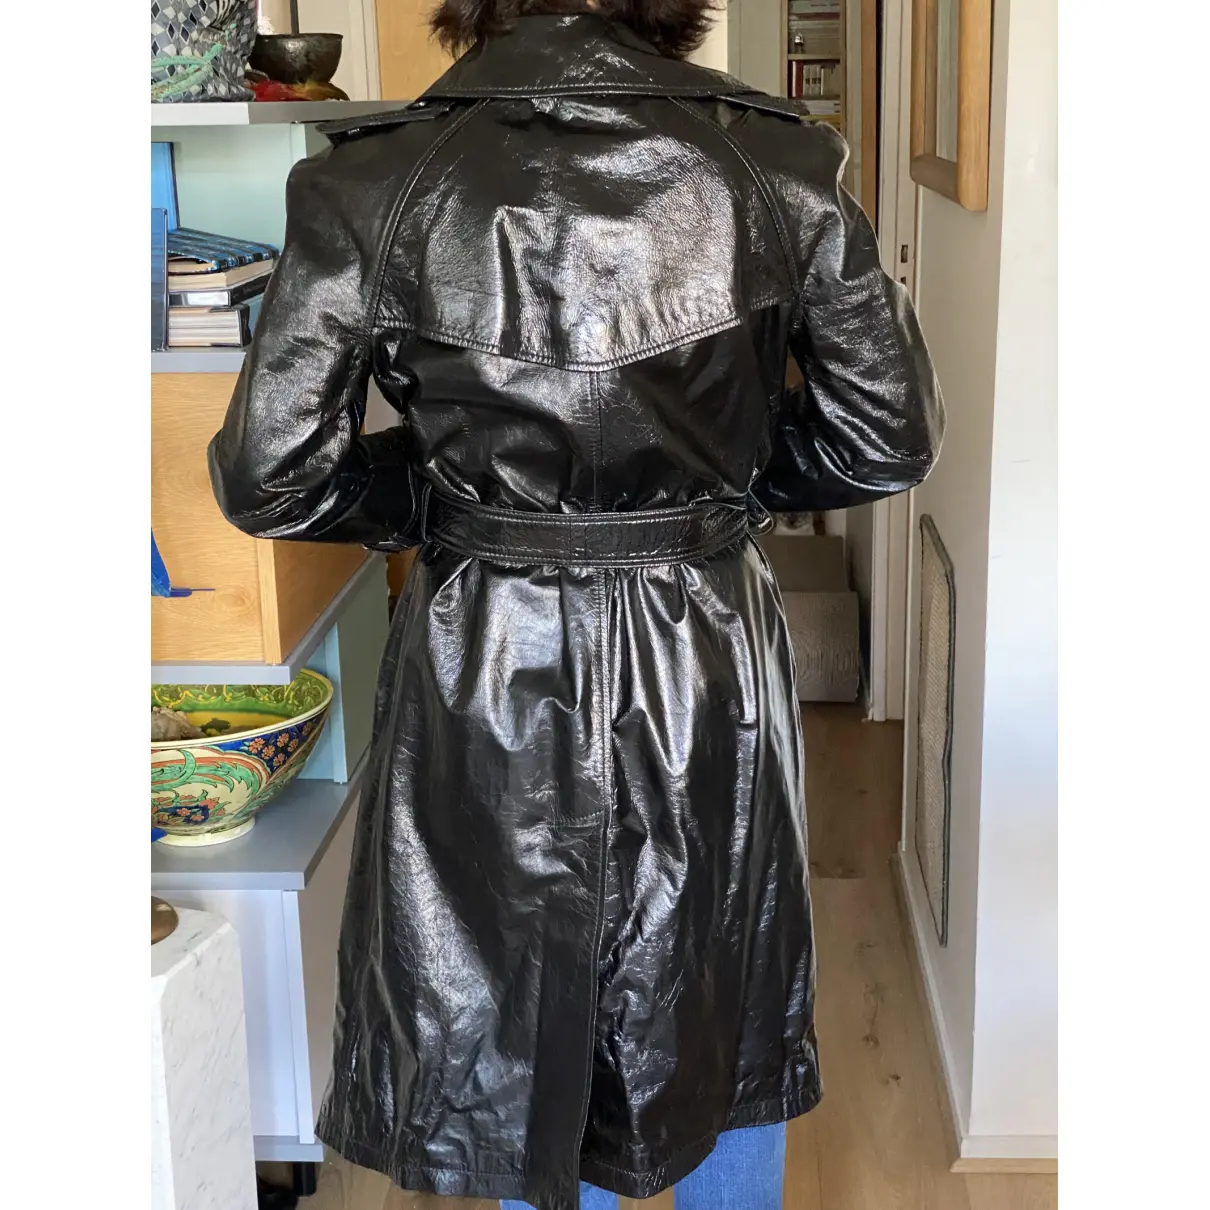 Patent leather trench coat Dolce & Gabbana - Vintage